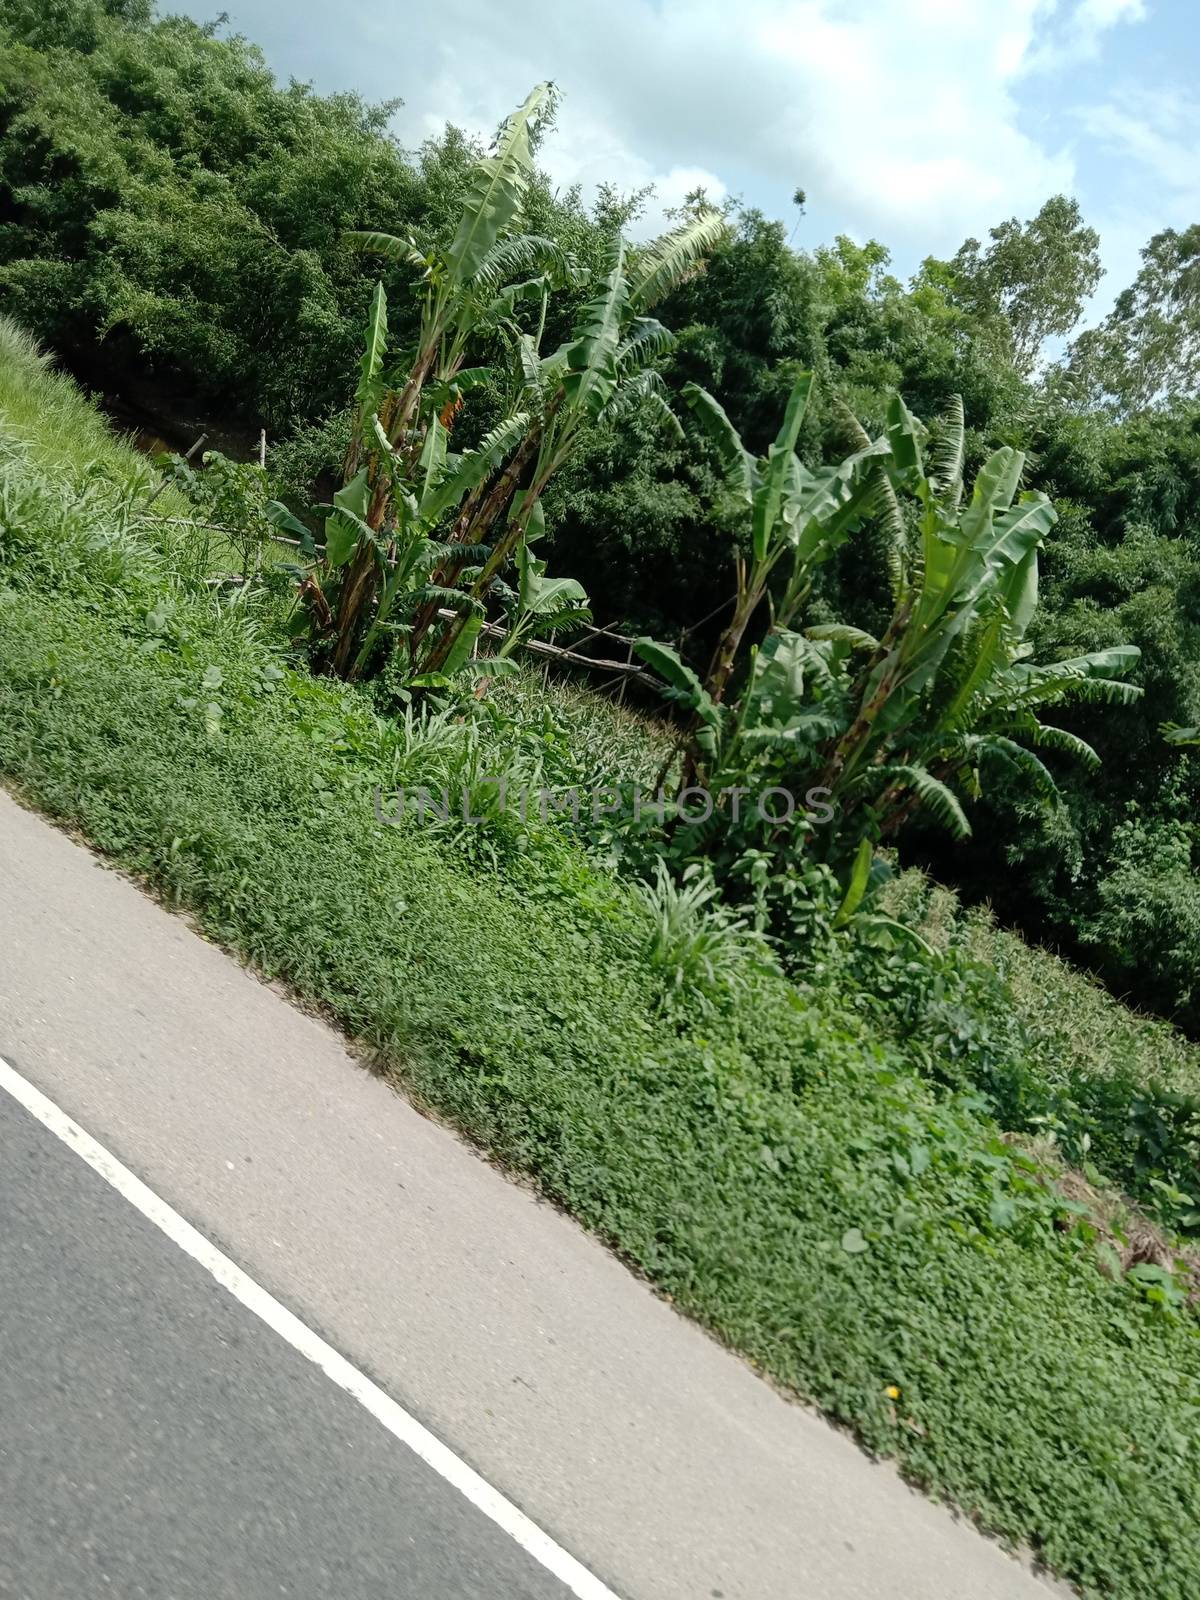 Highway closeup with nature and green